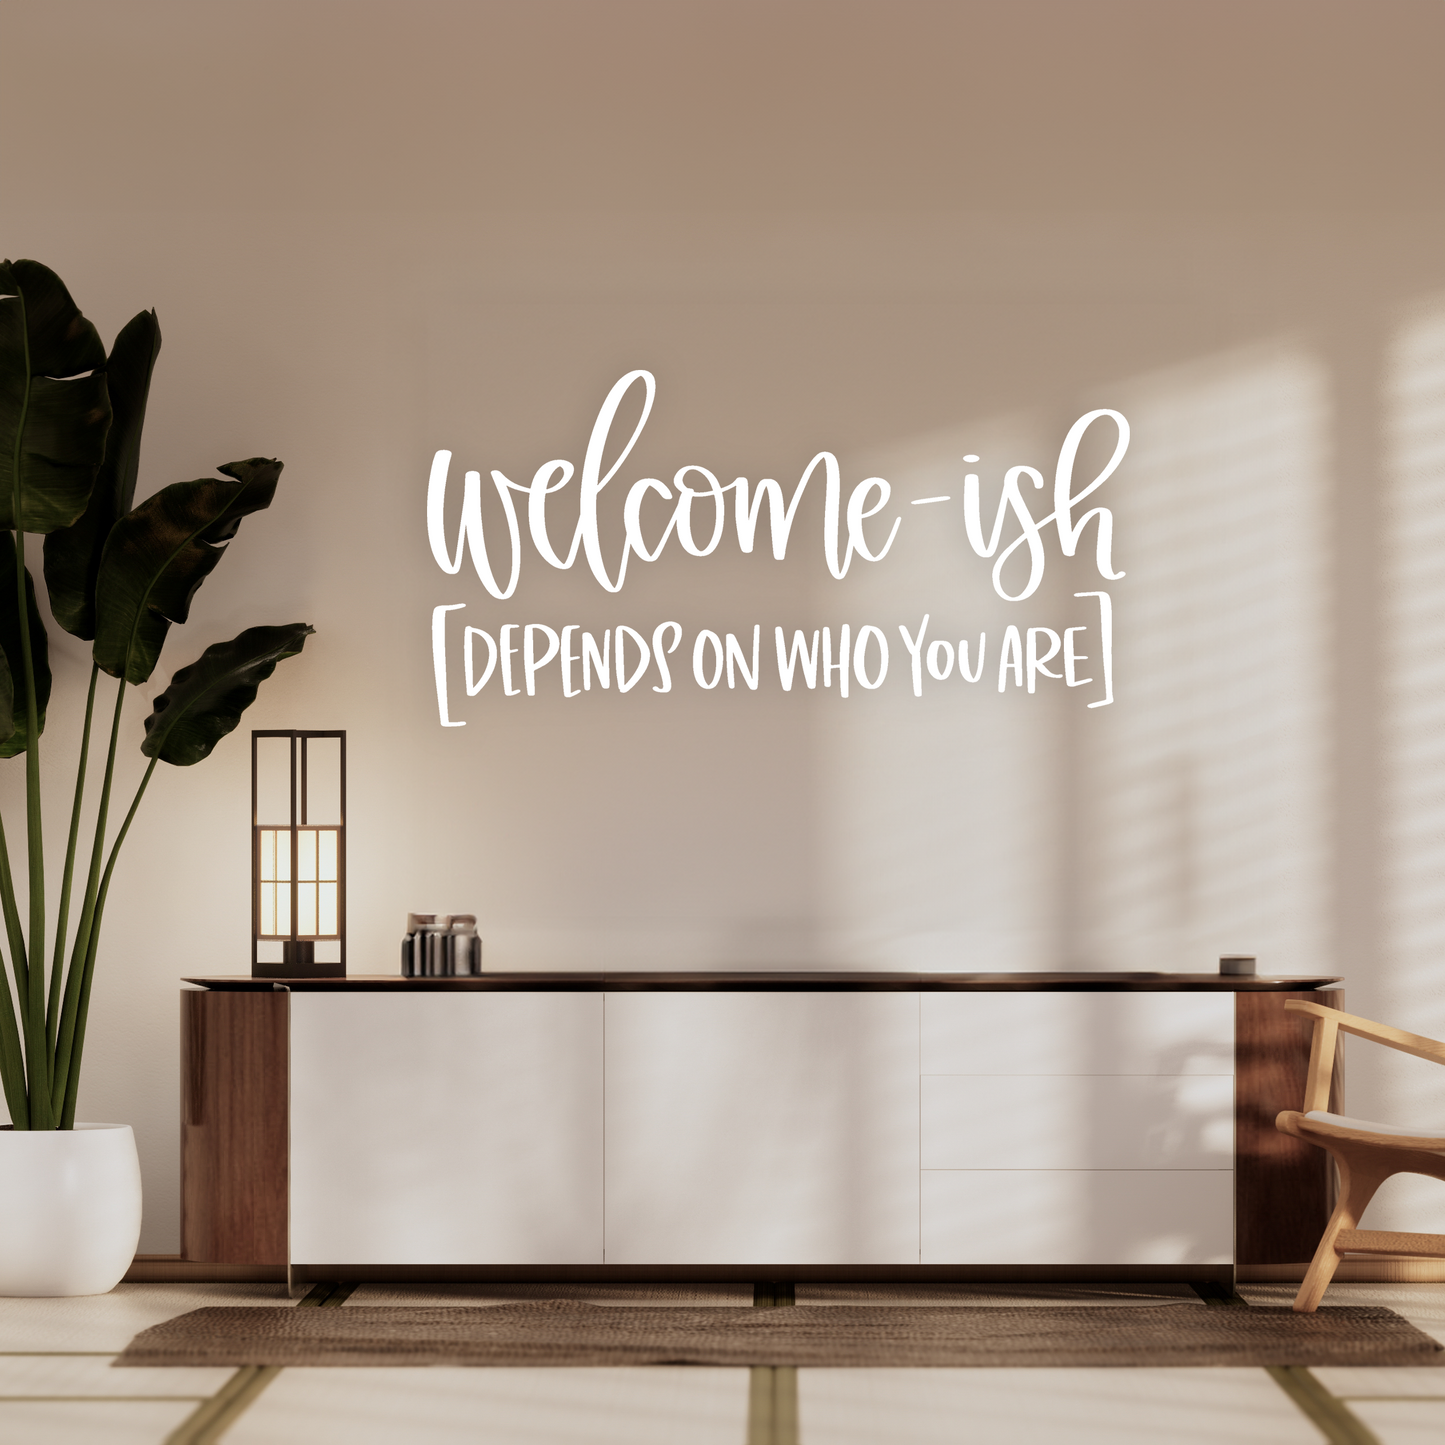 Welcome-Ish Wall Sticker Decal